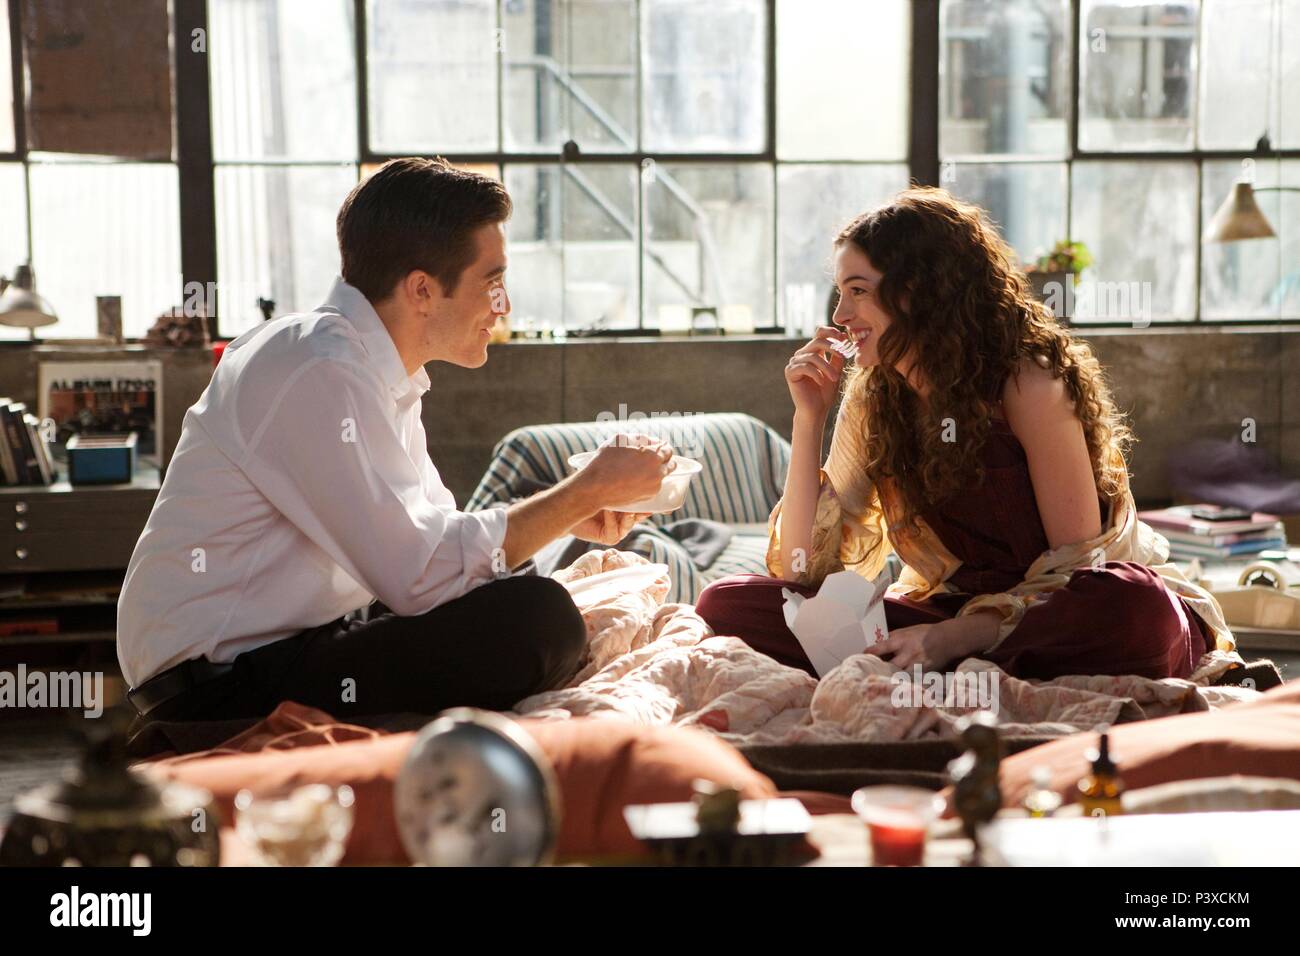 Original Film Title: LOVE AND OTHER DRUGS.  English Title: LOVE AND OTHER DRUGS.  Film Director: EDWARD ZWICK.  Year: 2010.  Stars: JAKE GYLLENHAAL; ANNE HATHAWAY. Credit: FOX 2000 PICTURES / Album Stock Photo